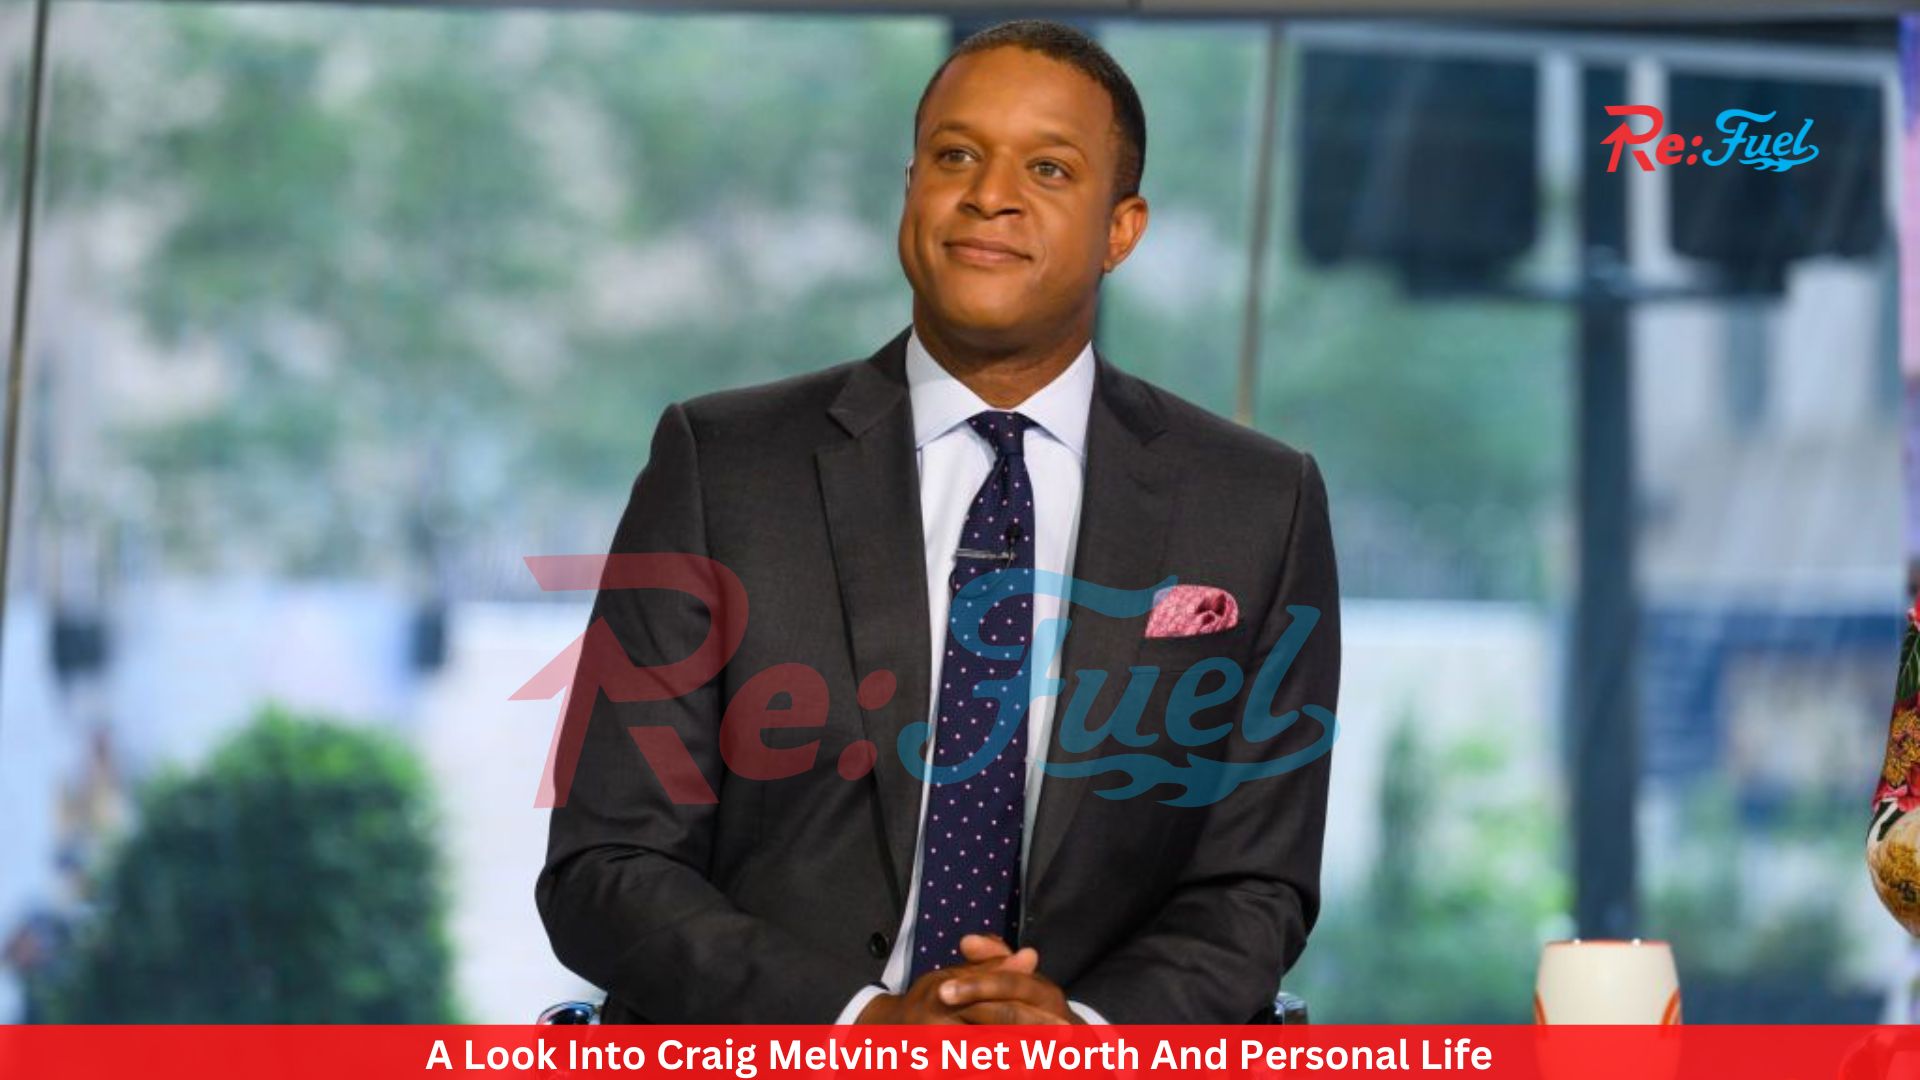 A Look Into Craig Melvin's Net Worth And Personal Life